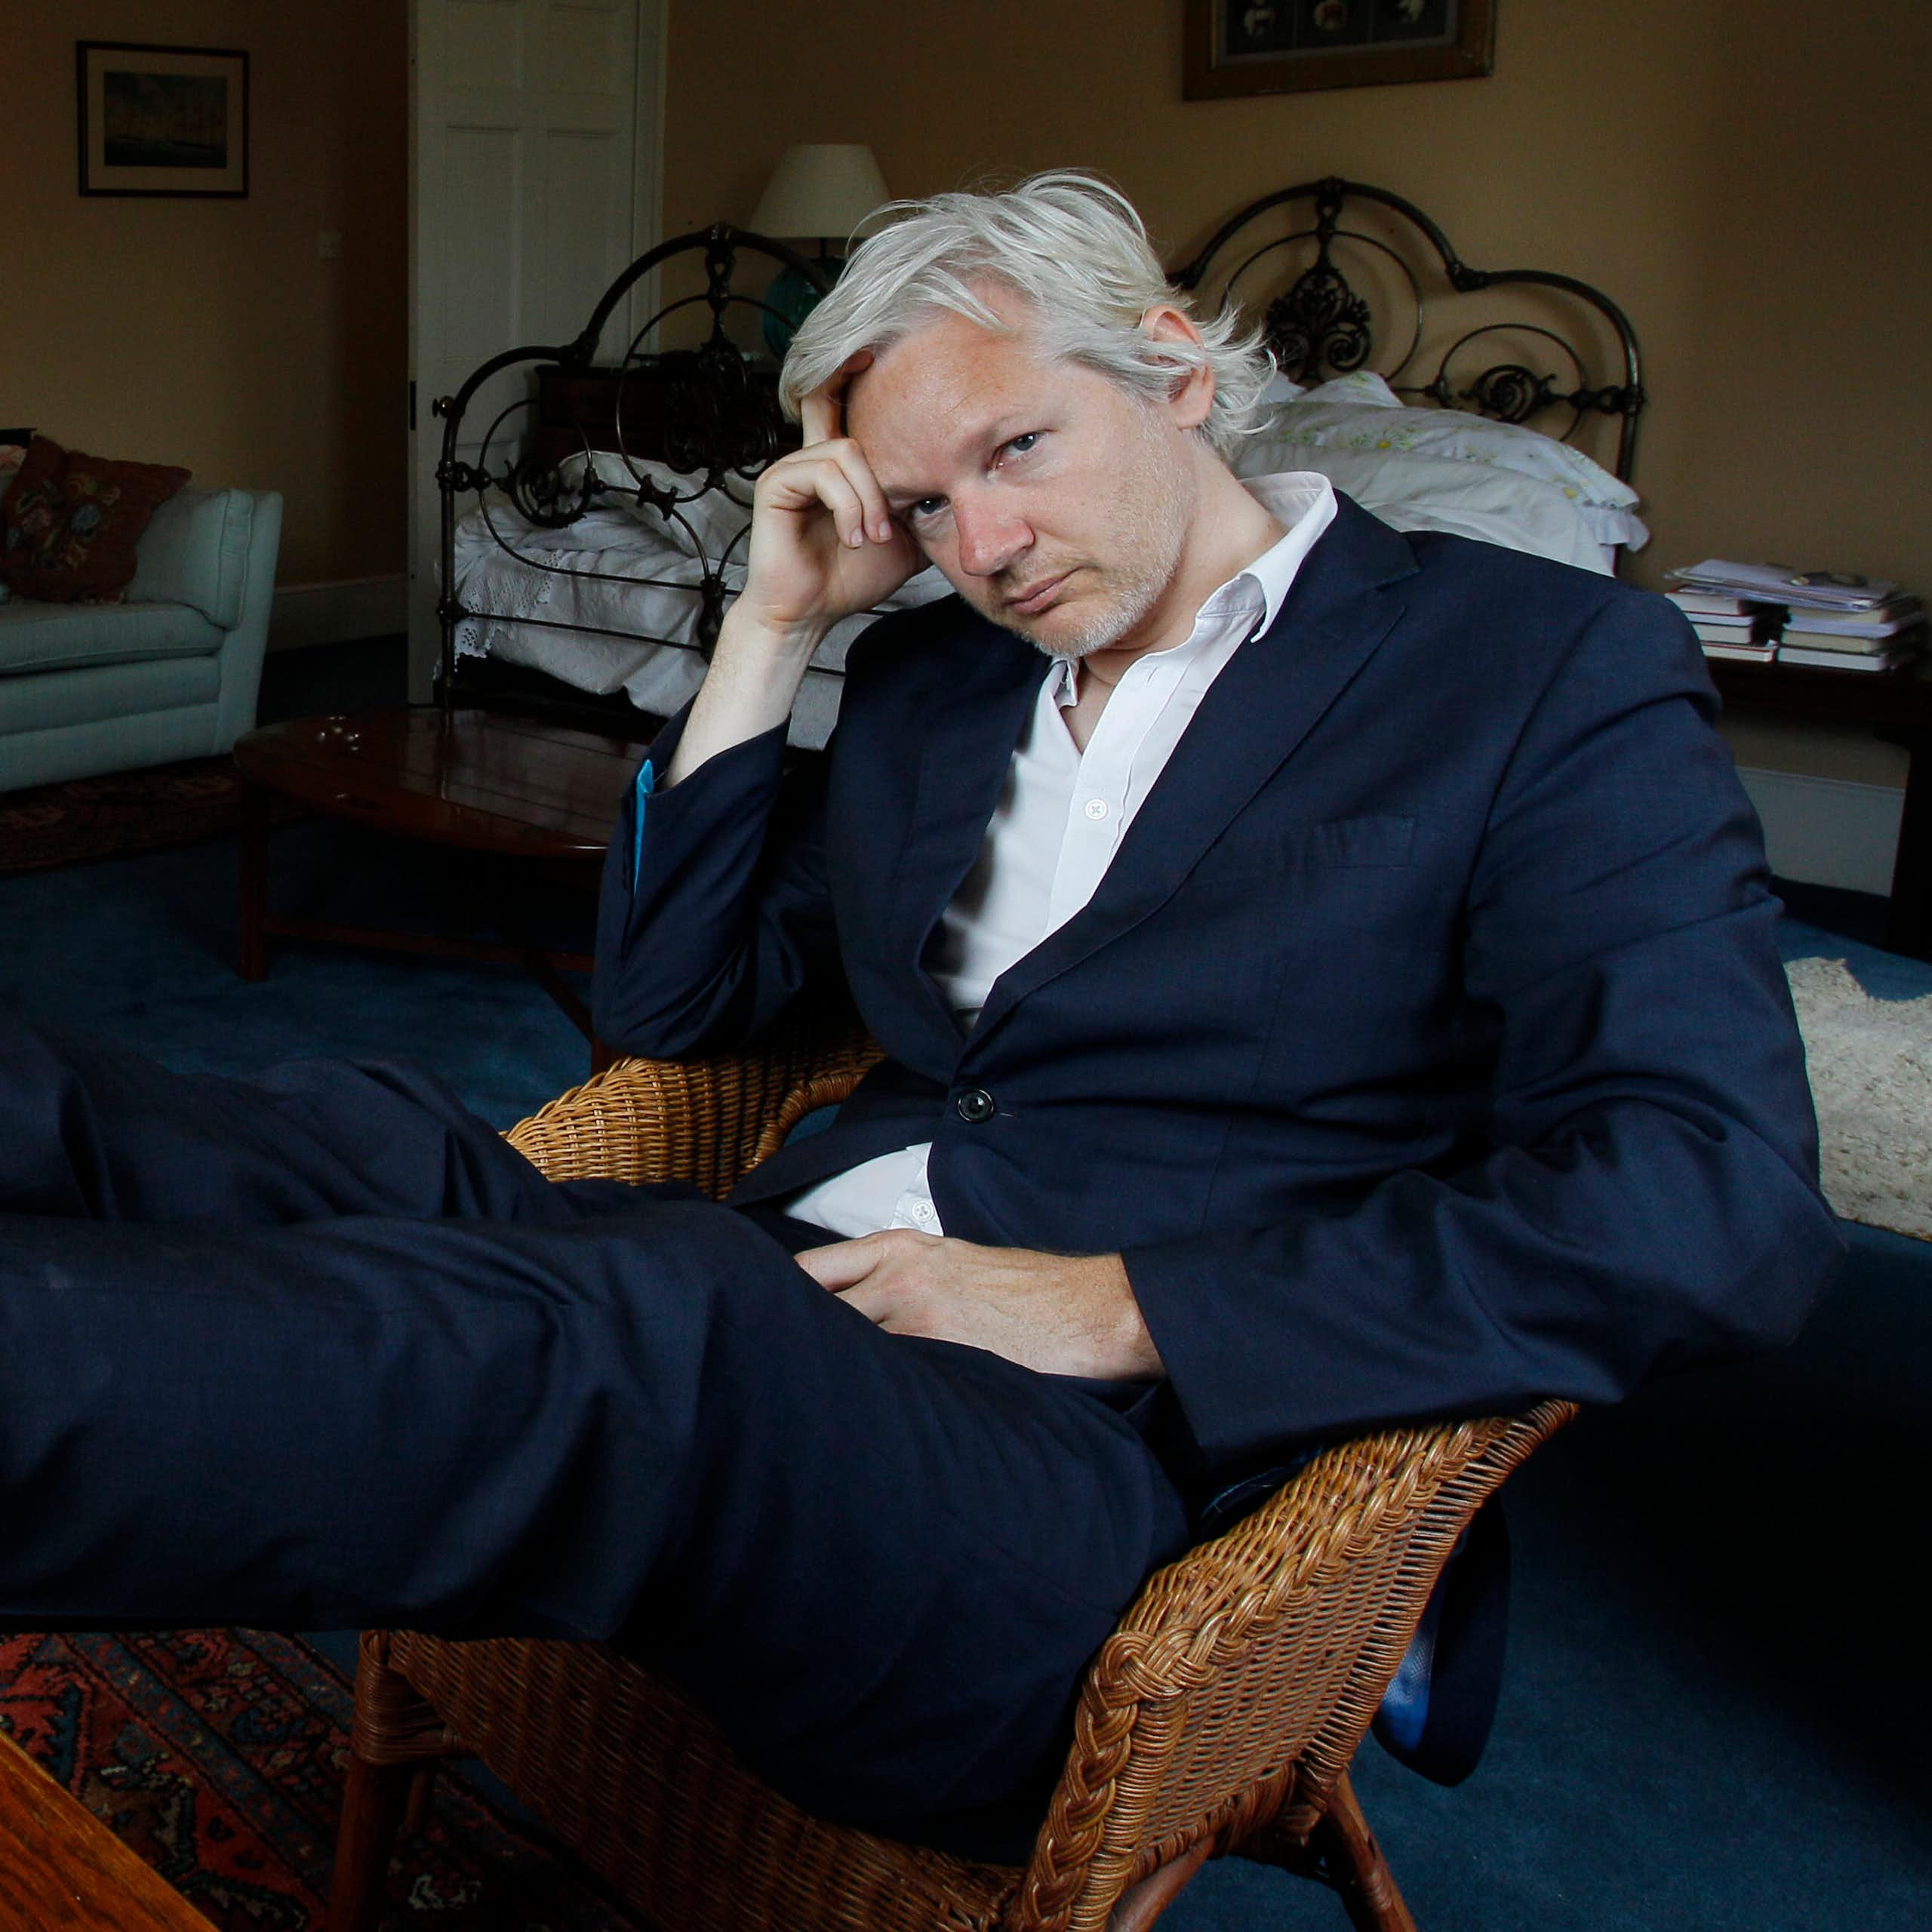 Julian Assange was isolated for more than a decade. Here’s what that does to the body and mind